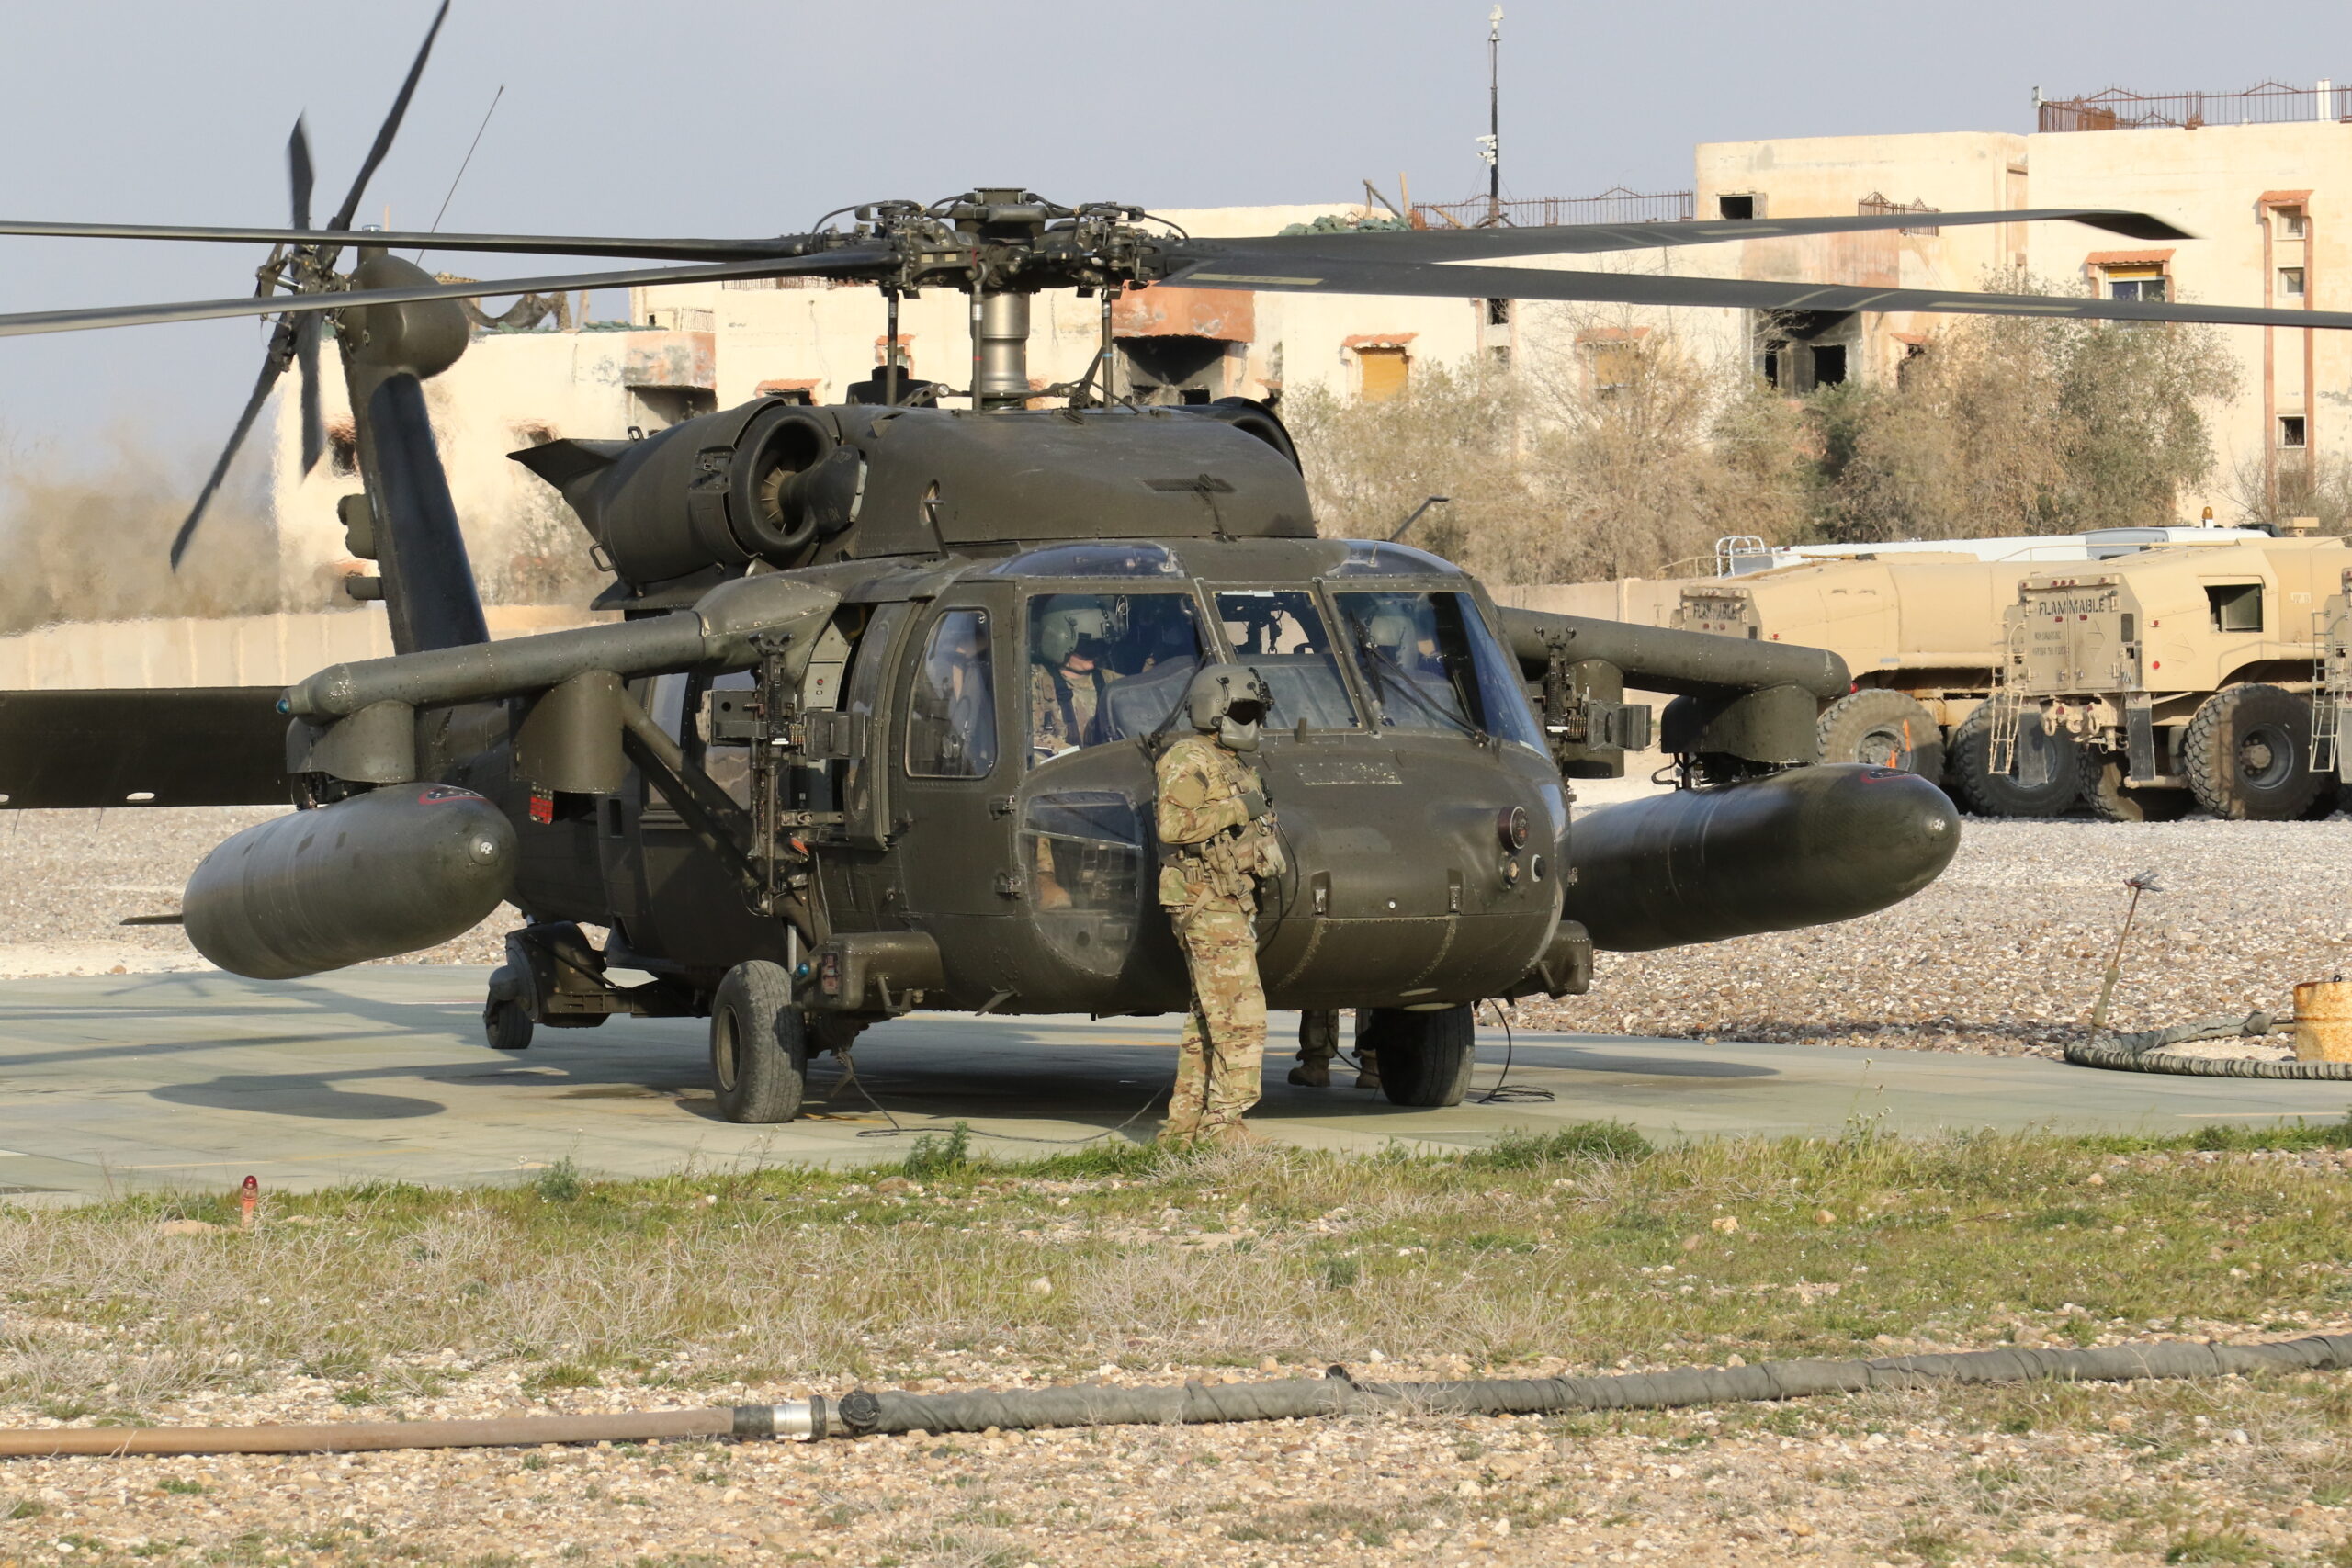 Greece is negotiating for Black Hawk helicopters with the United States